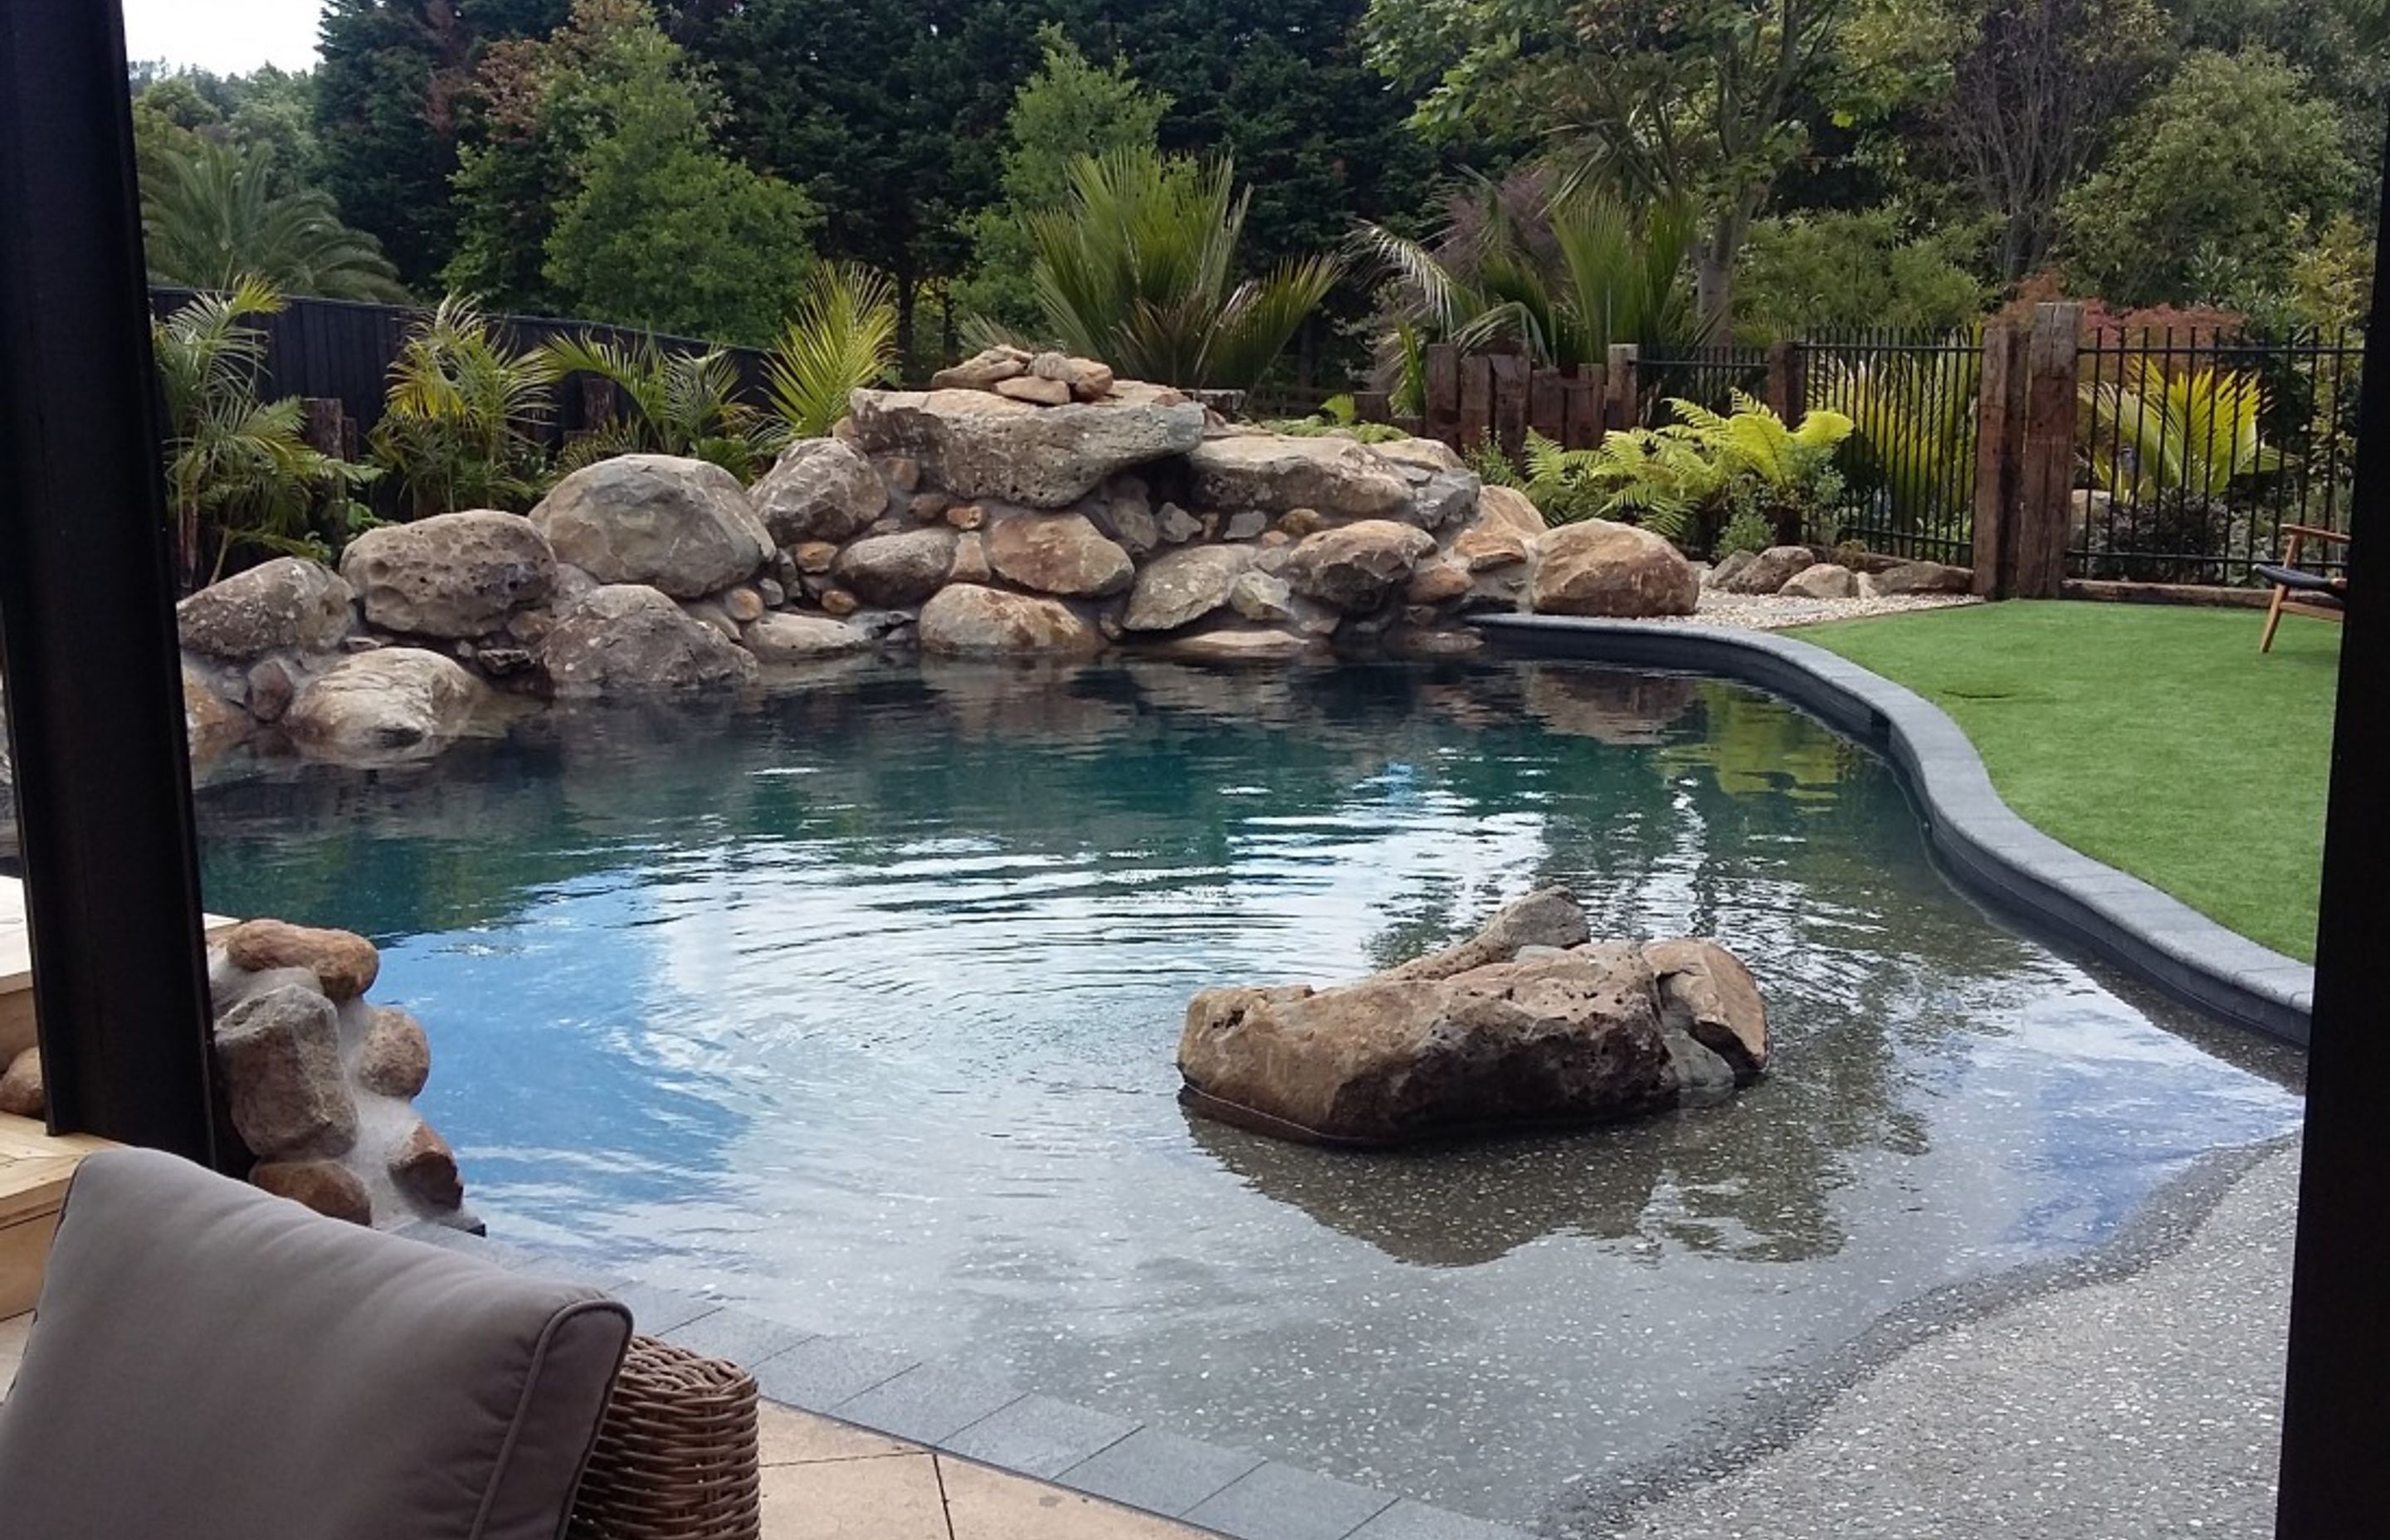 Create your own personal back yard oasis with a rock pool